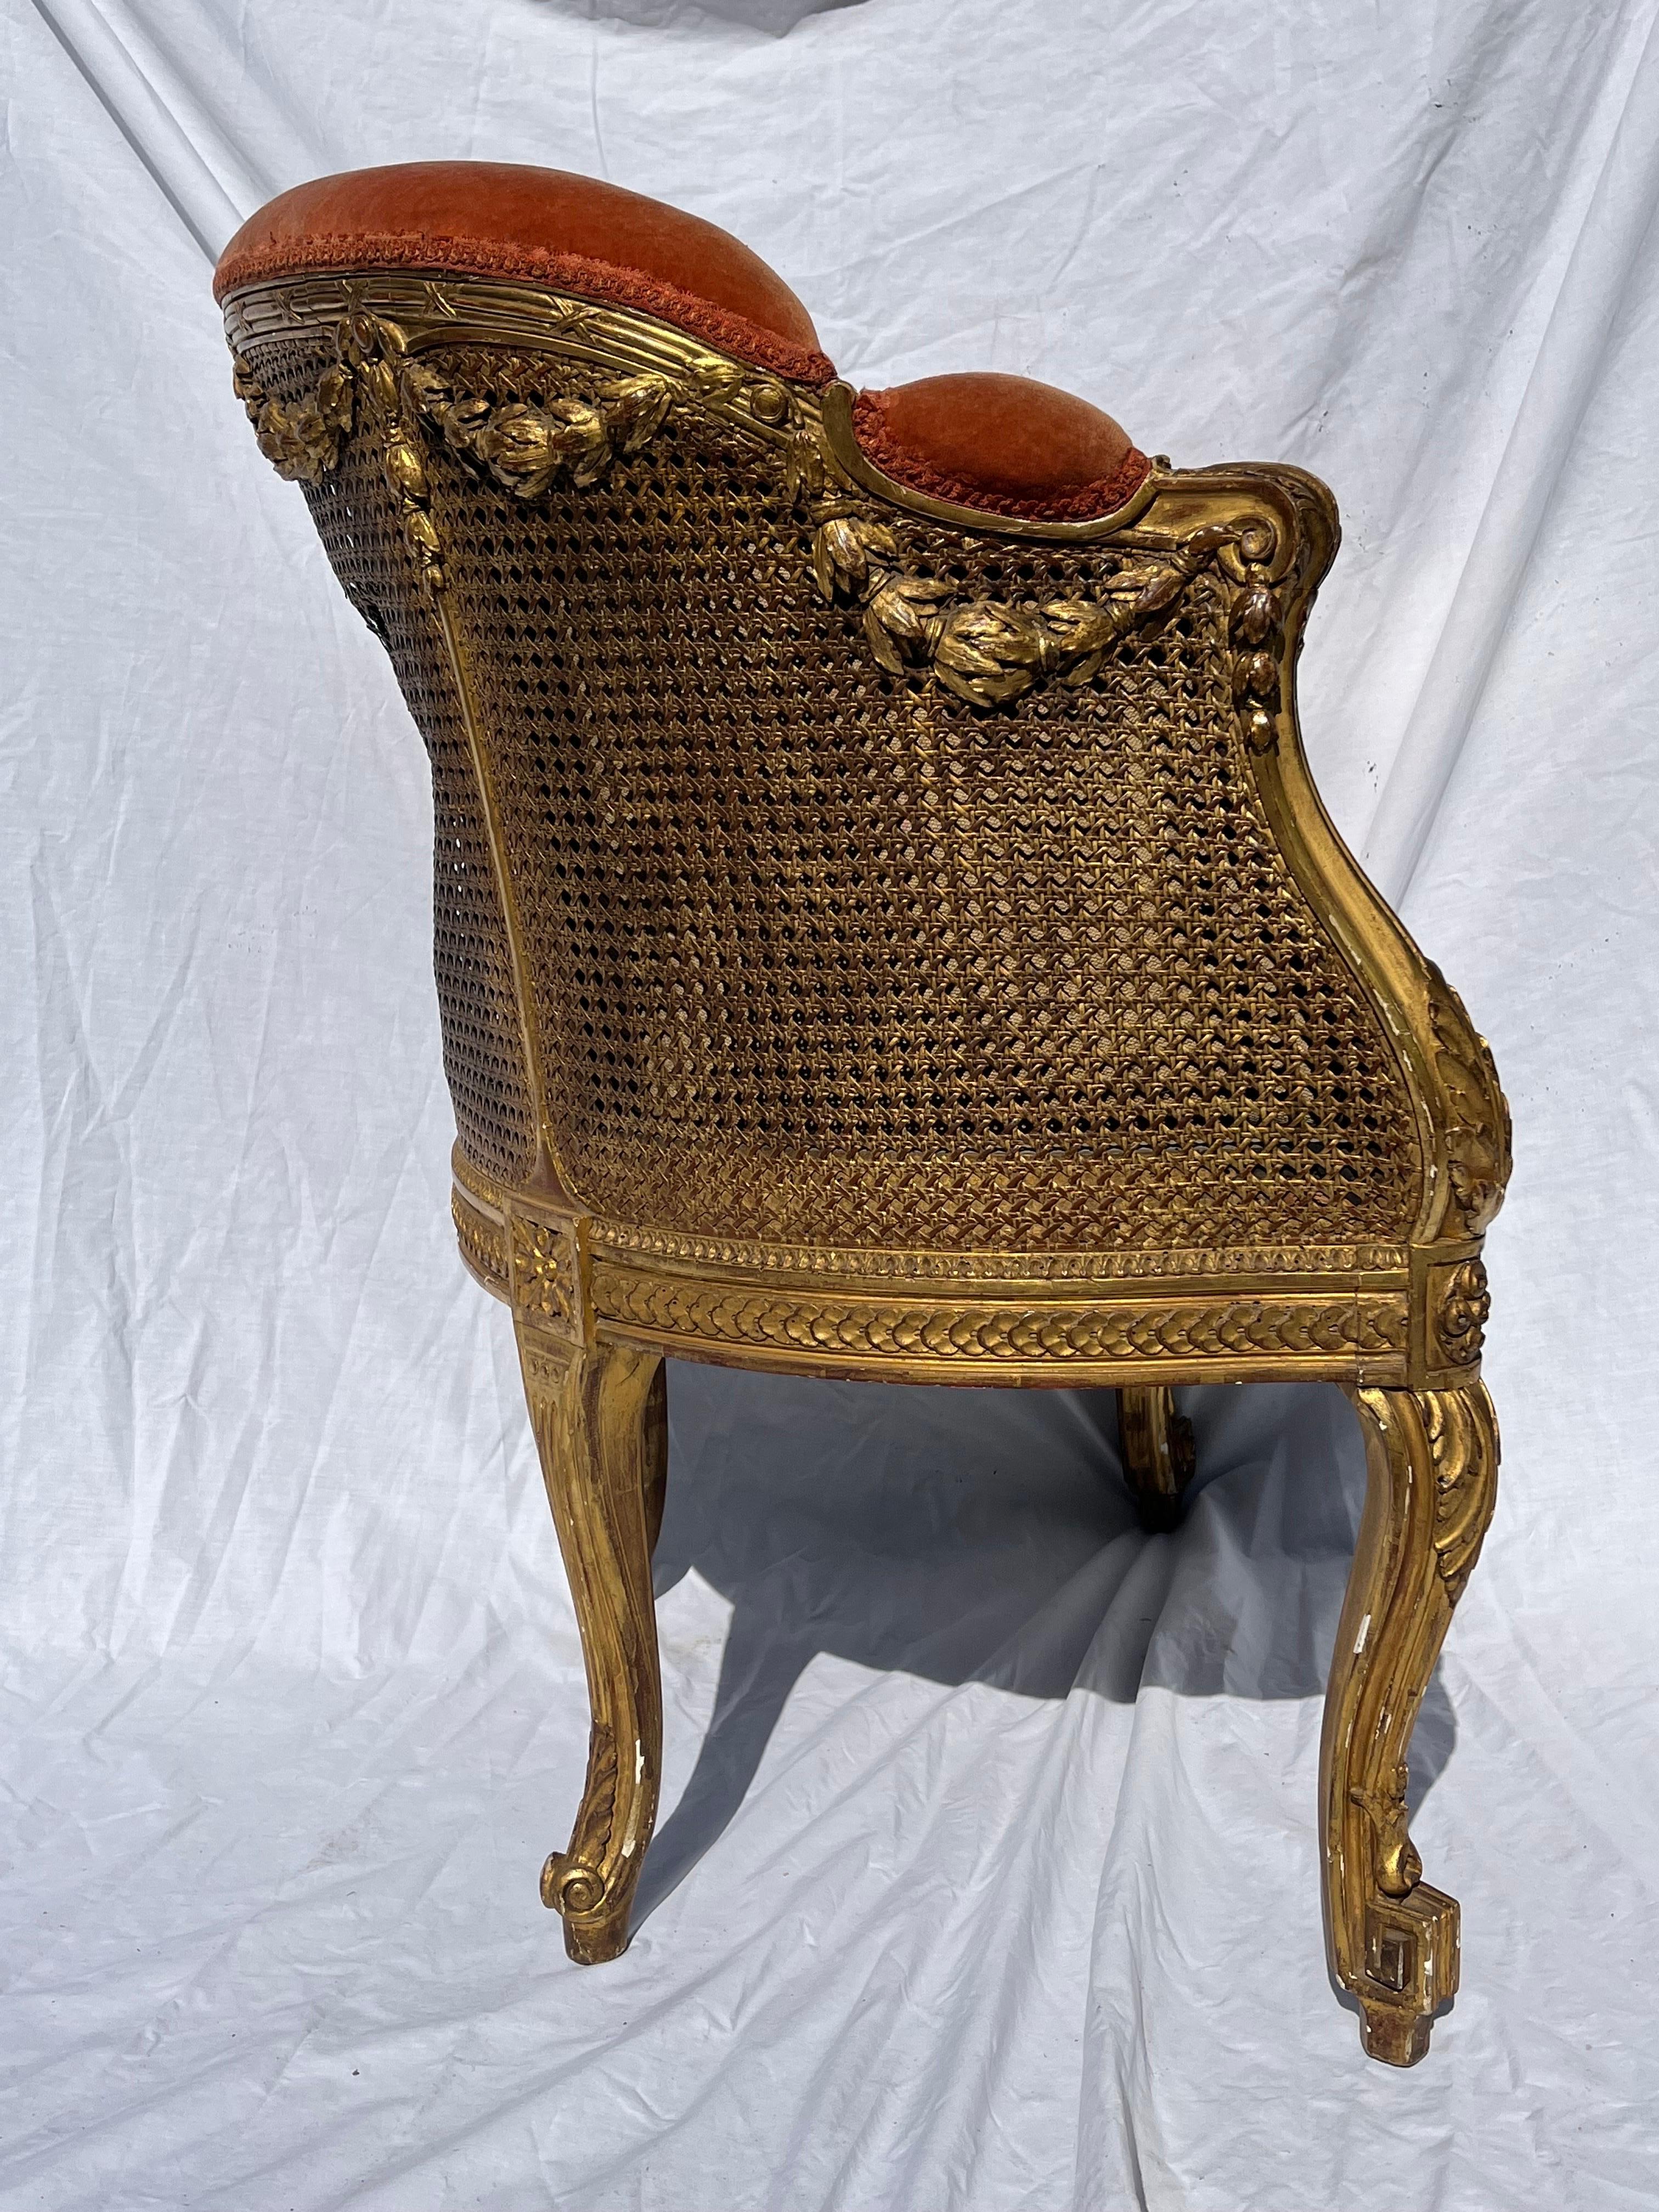 Antique French Gilt and Carved 19th Century Cane Upholstered Bergere Armchair For Sale 5